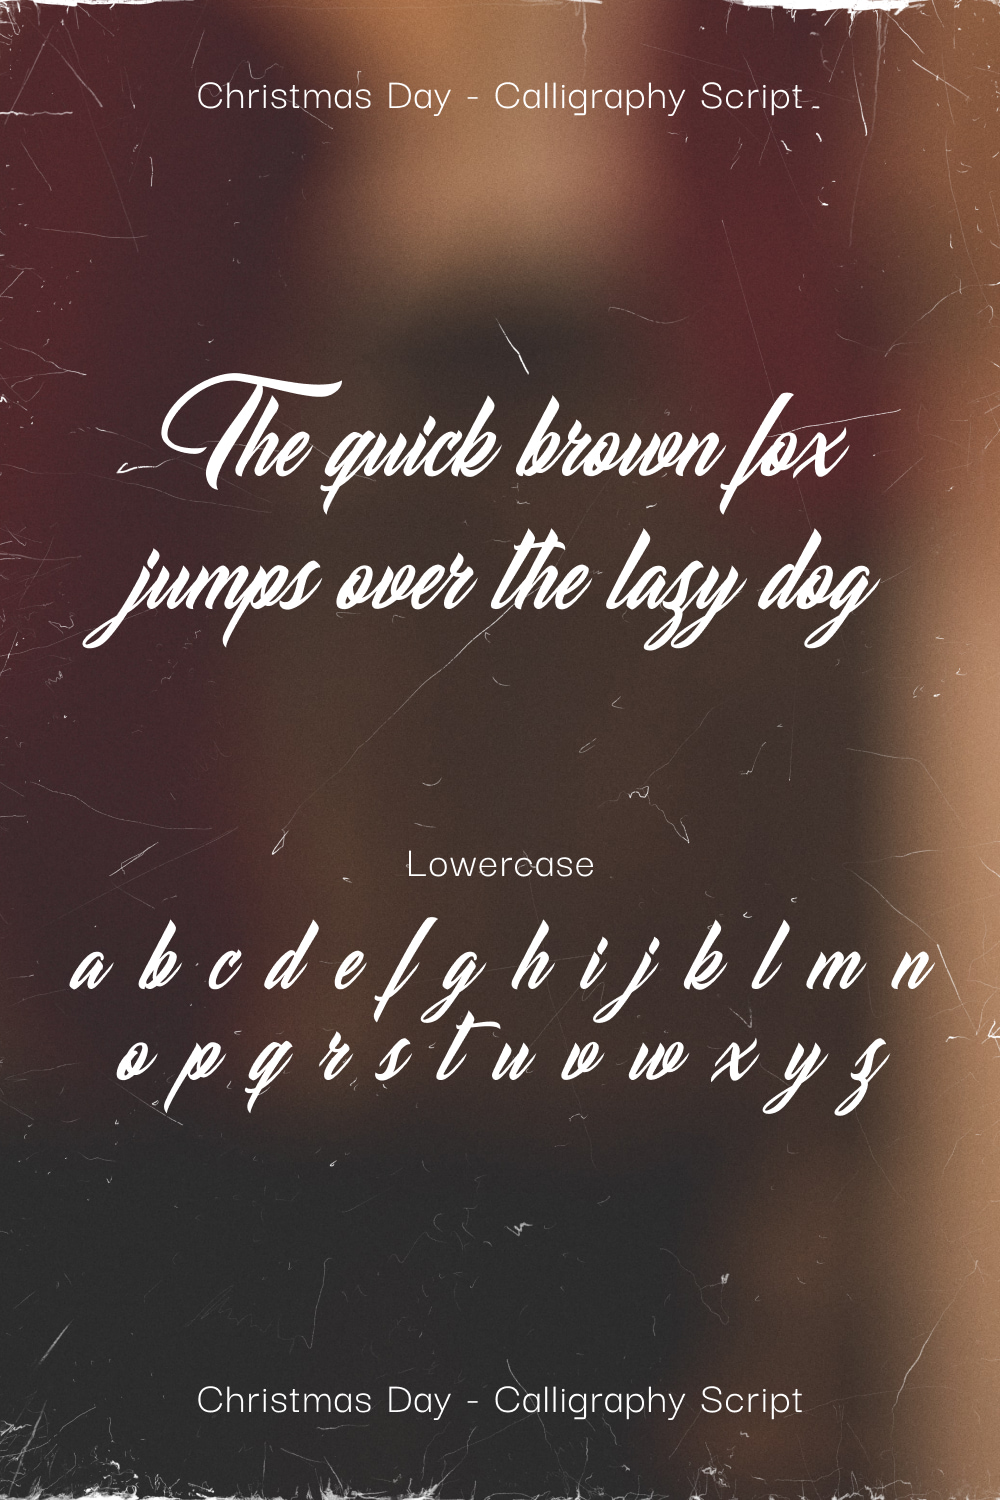 Numeric option of the font on the brown background.